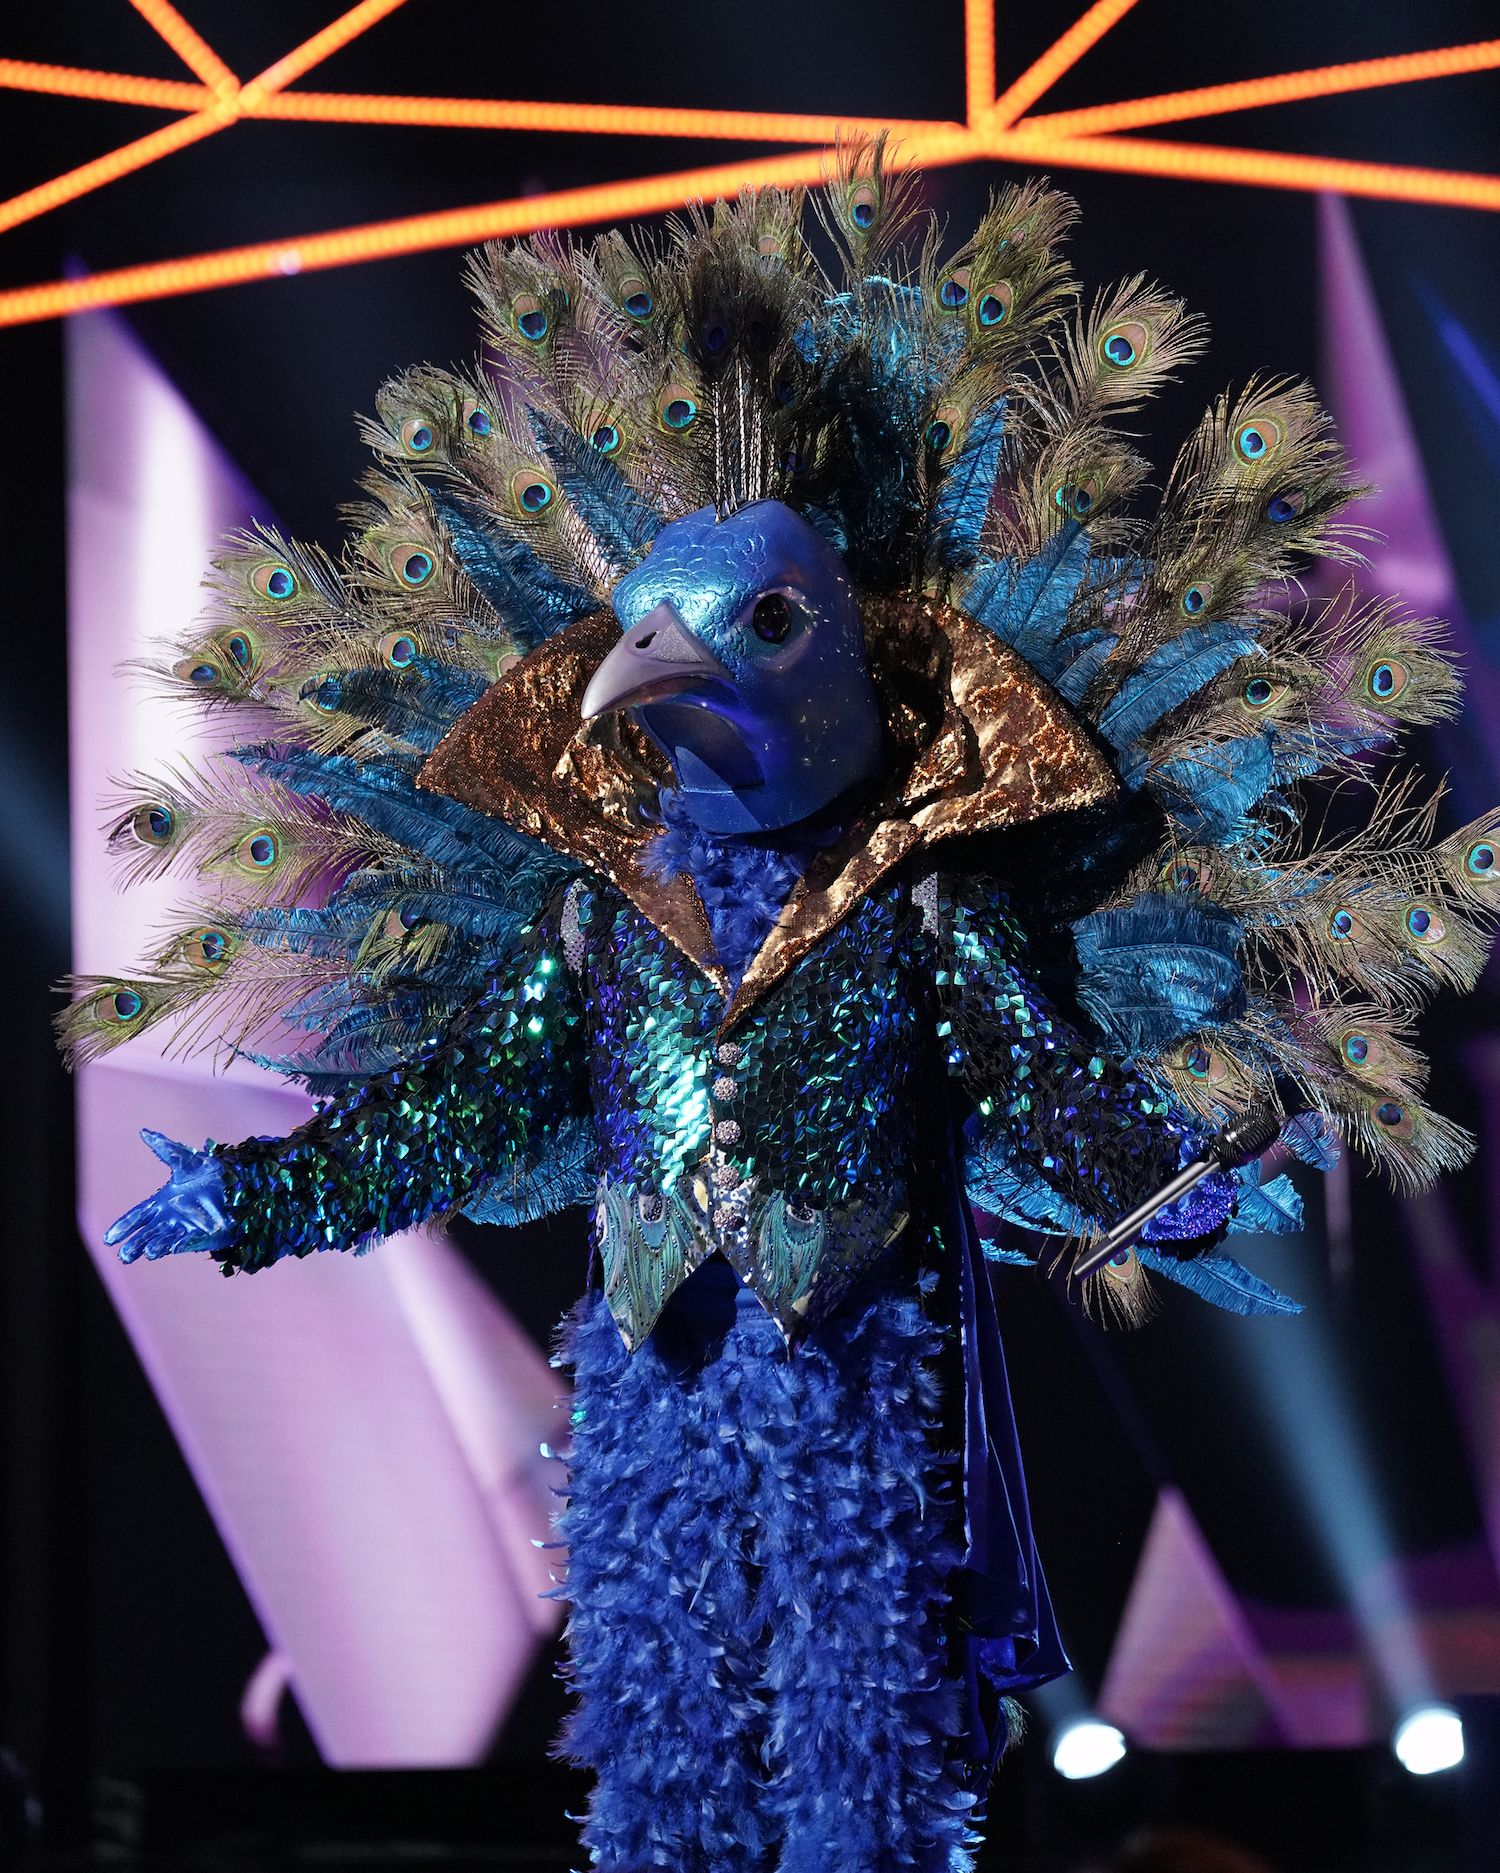 cabriolet spids Overgivelse Who Is the Peacock on 'The Masked Singer'? - The Peacock 'Masked Singer'  Spoilers, Clues, and Guesses